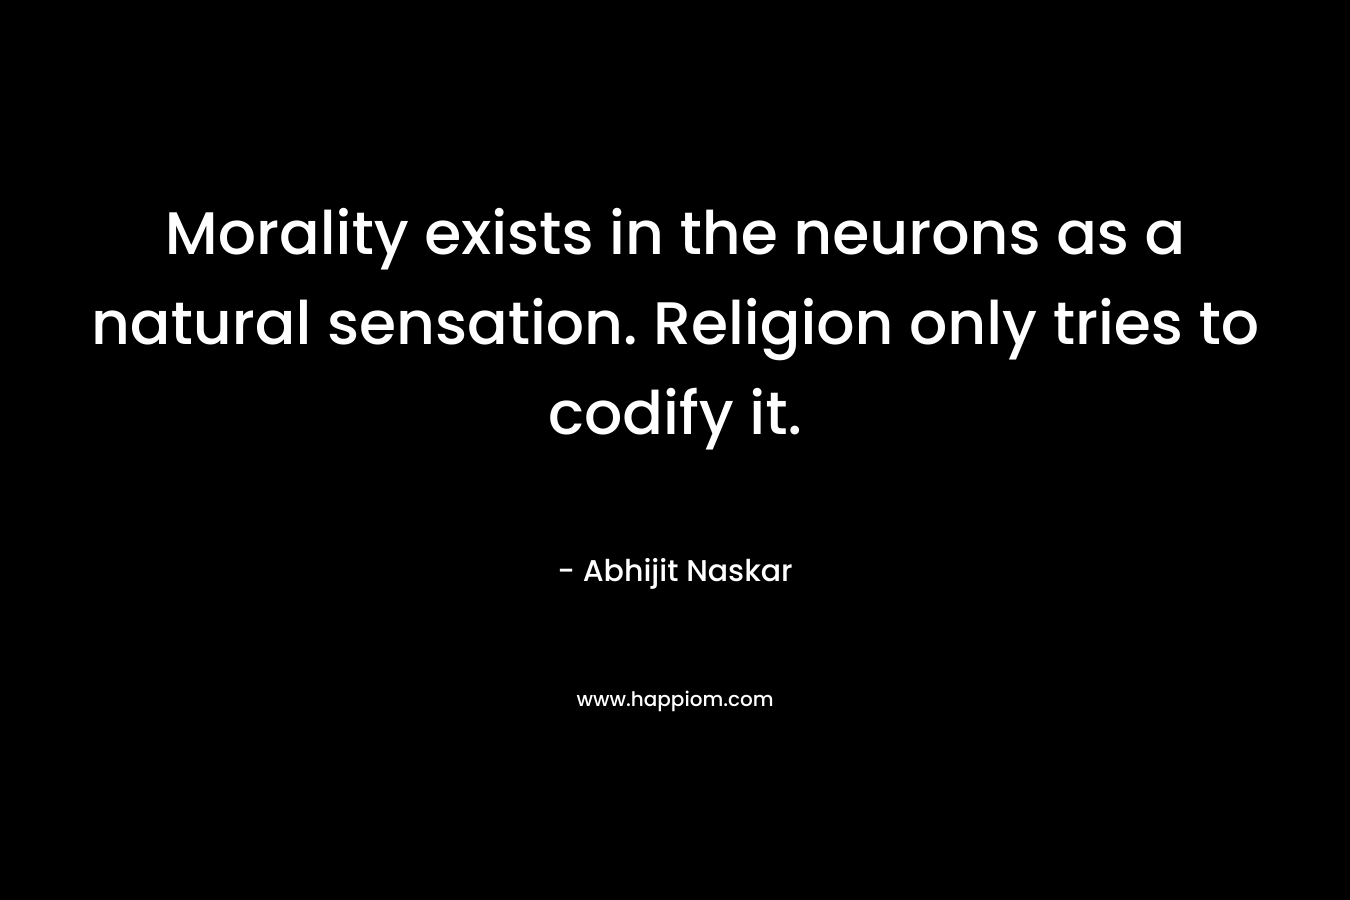 Morality exists in the neurons as a natural sensation. Religion only tries to codify it. – Abhijit Naskar